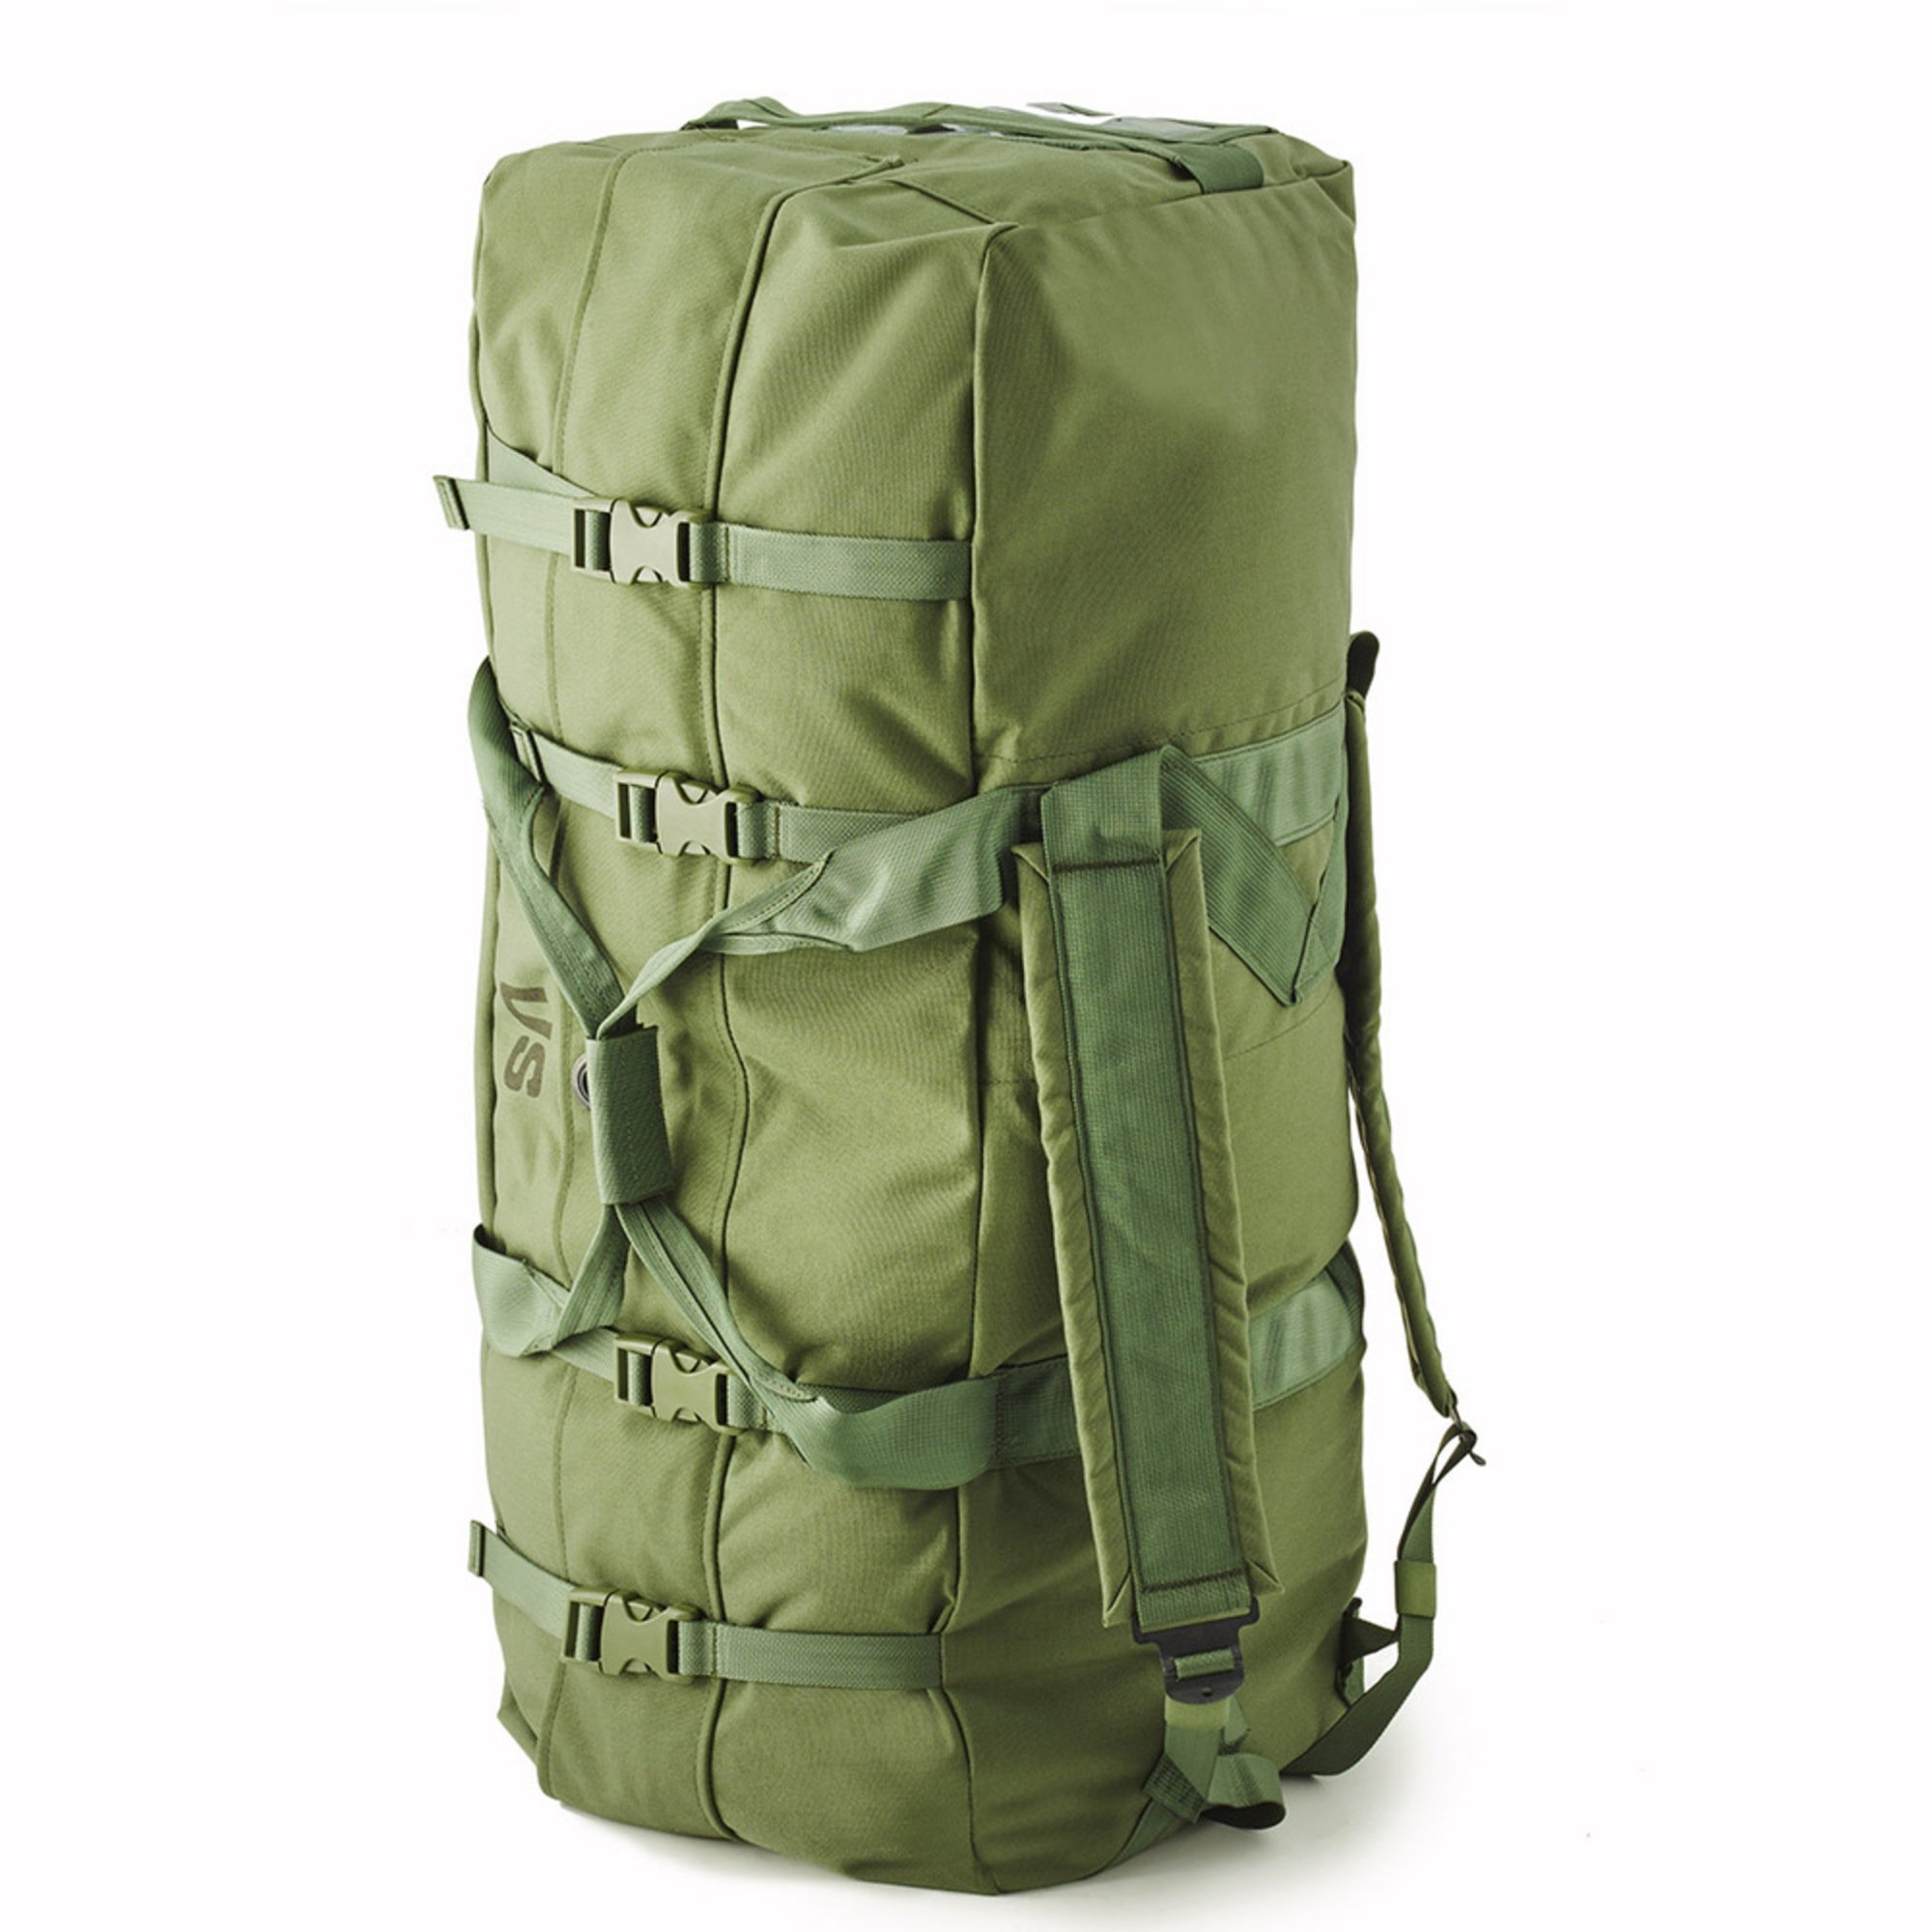 Improved Duffle Bag | Working Accessories & Field Gear | Military ...